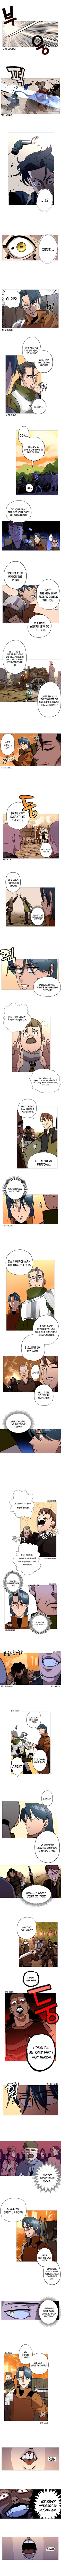 The Story Of A Low-Rank Soldier Becoming A Monarch - Page 2